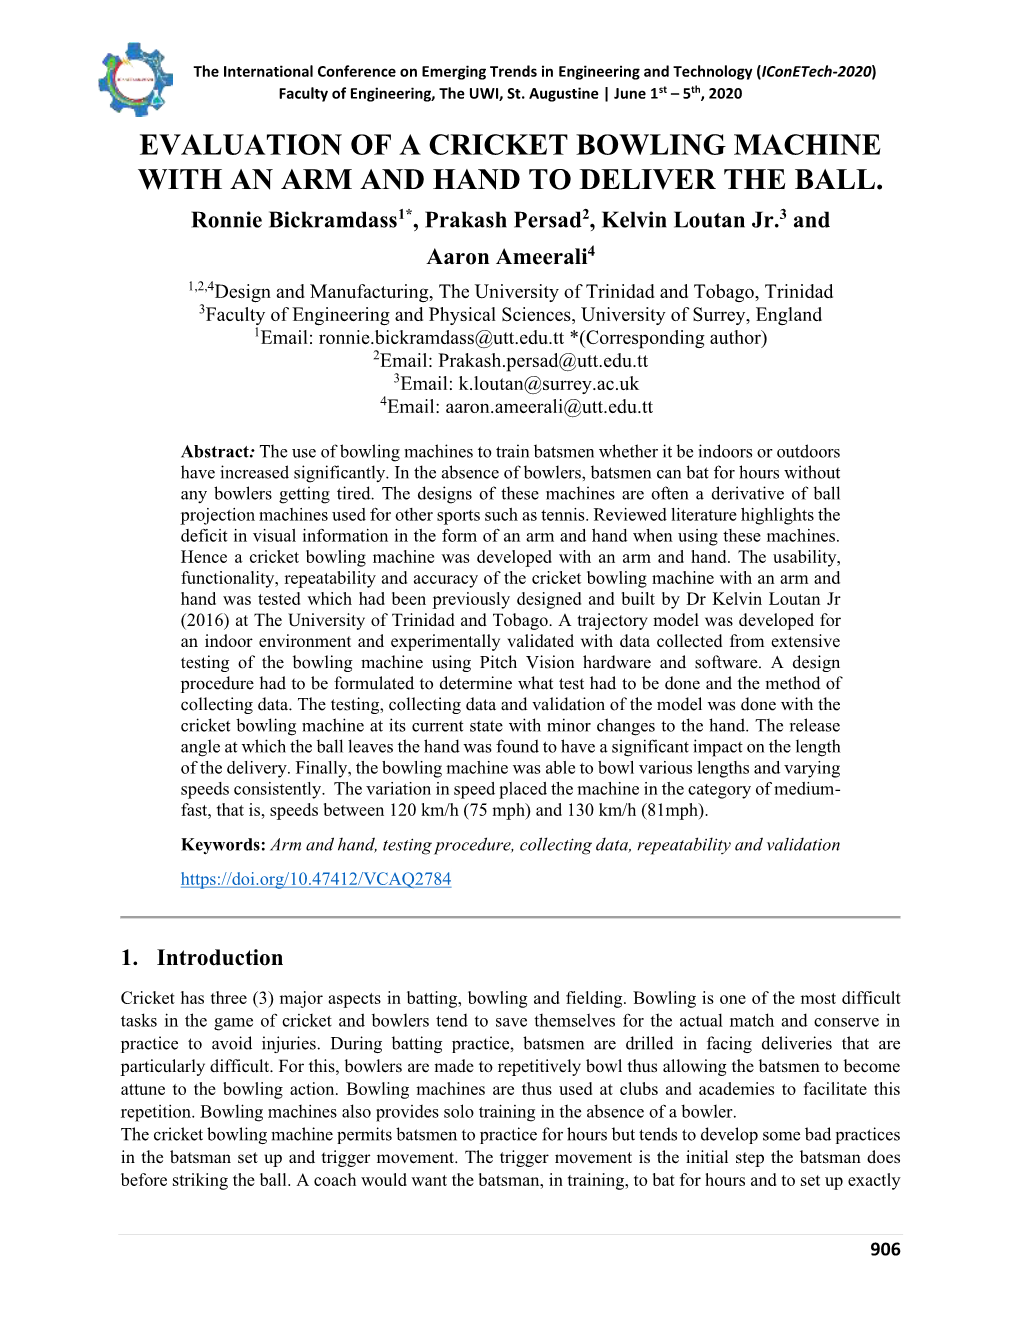 Evaluation of a Cricket Bowling Machine with an Arm and Hand to Deliver the Ball